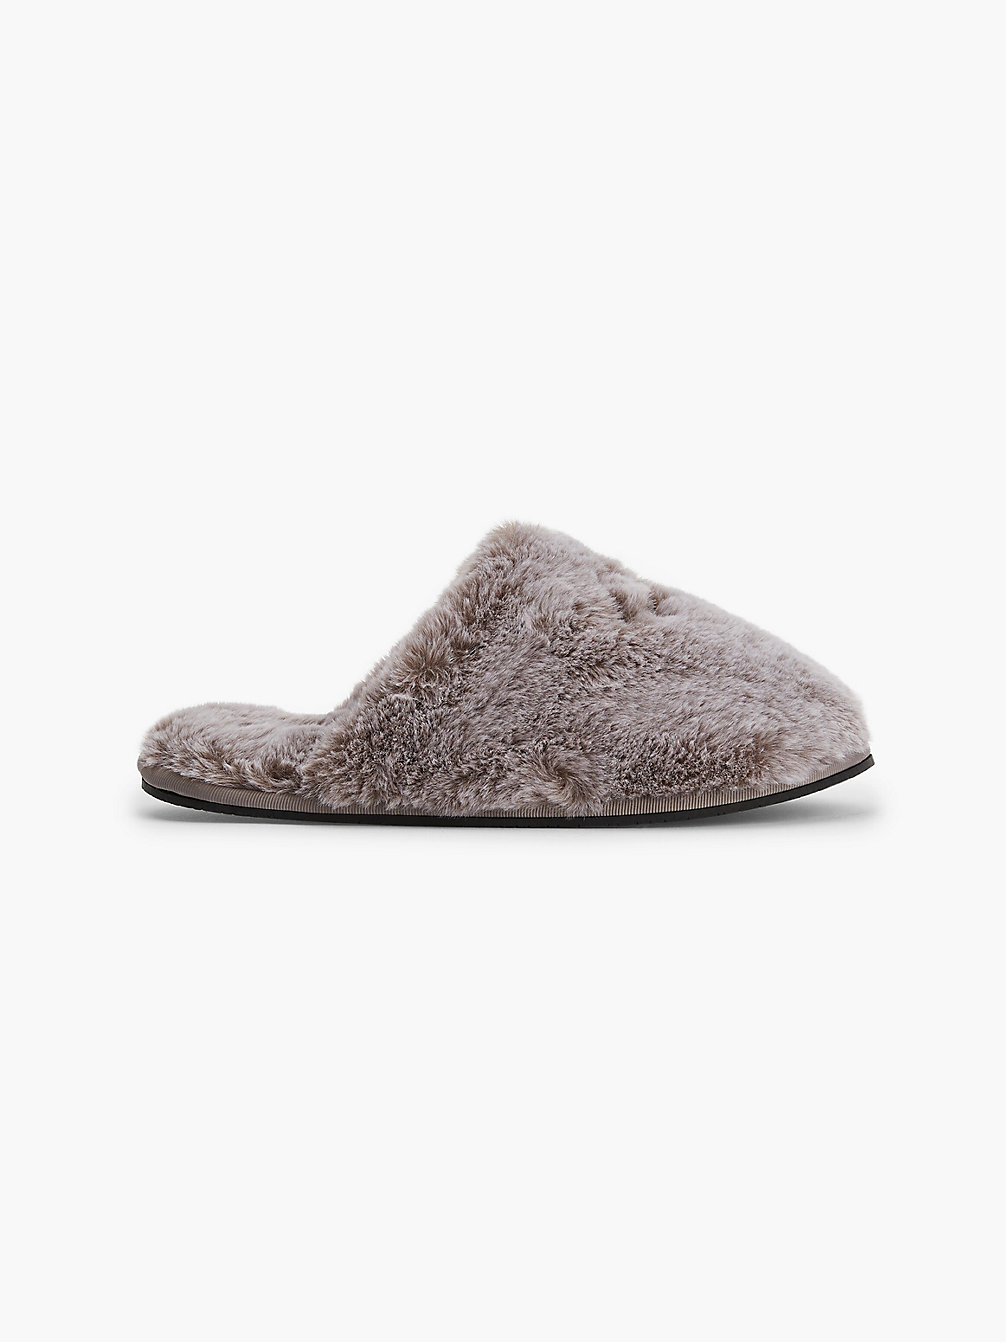 LIGHT GREY Recycled Faux Fur Slippers undefined women Calvin Klein